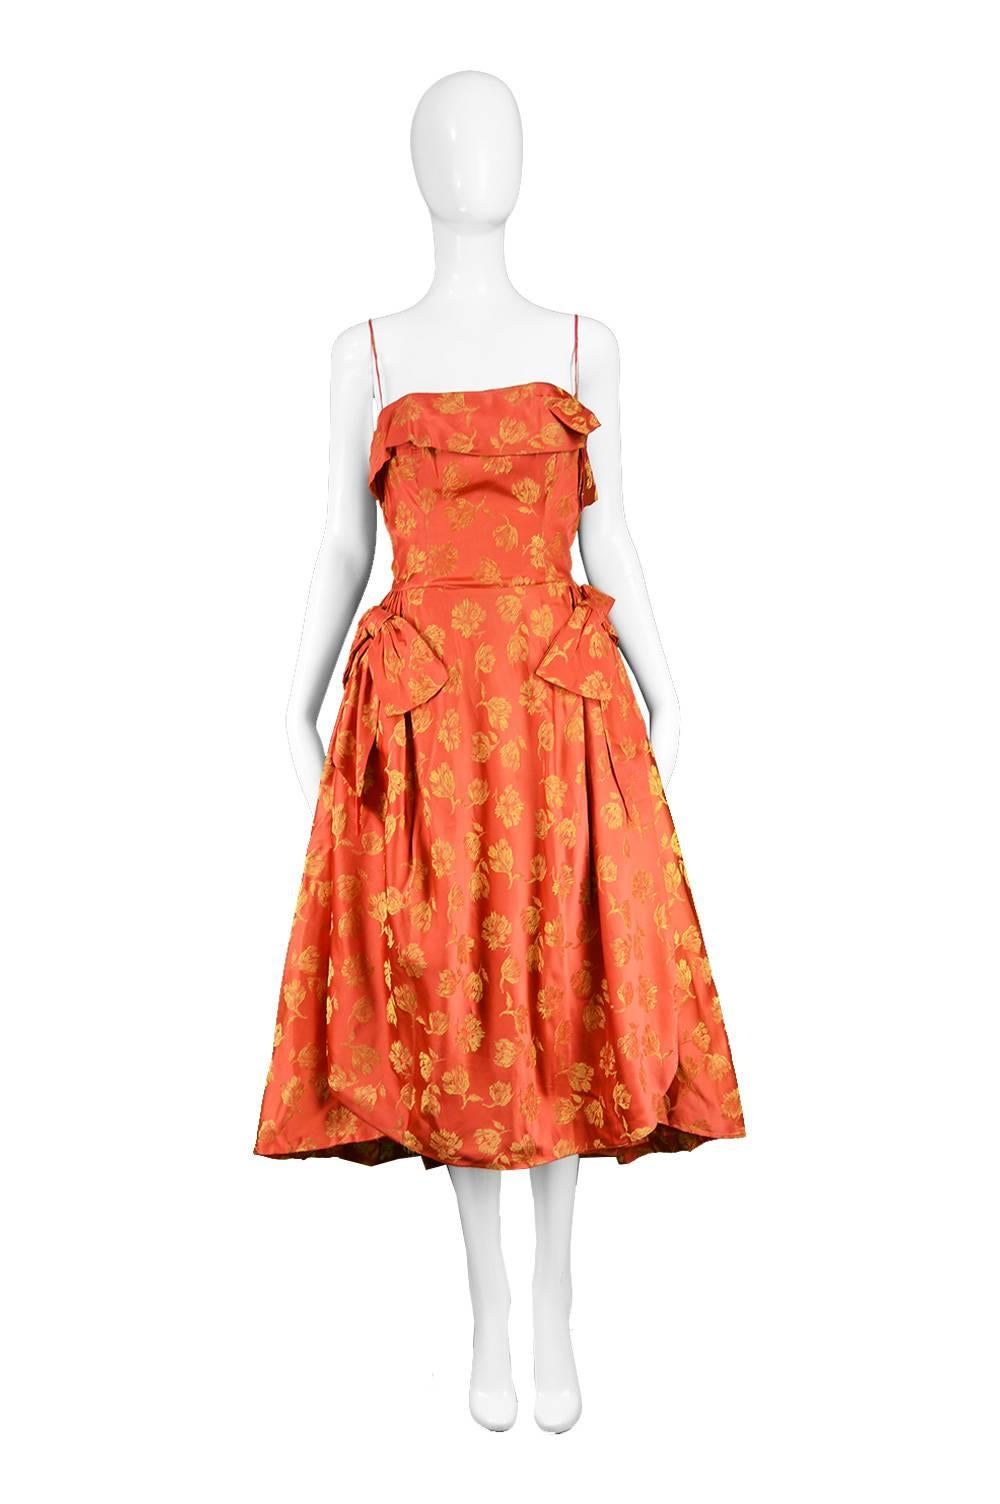 John Selby 1950s Vintage Red & Gold Brocade Jacquard Panelled Dress

Size: Marked 38
Bust - 34” / 86cm
Waist - 27” / 68cm 
Hips (Due to underskirt)  - up to 40” / 101cm 
Length (Bust to Hem) - 40” / 101cm

Condition: Excellent Vintage Condition -